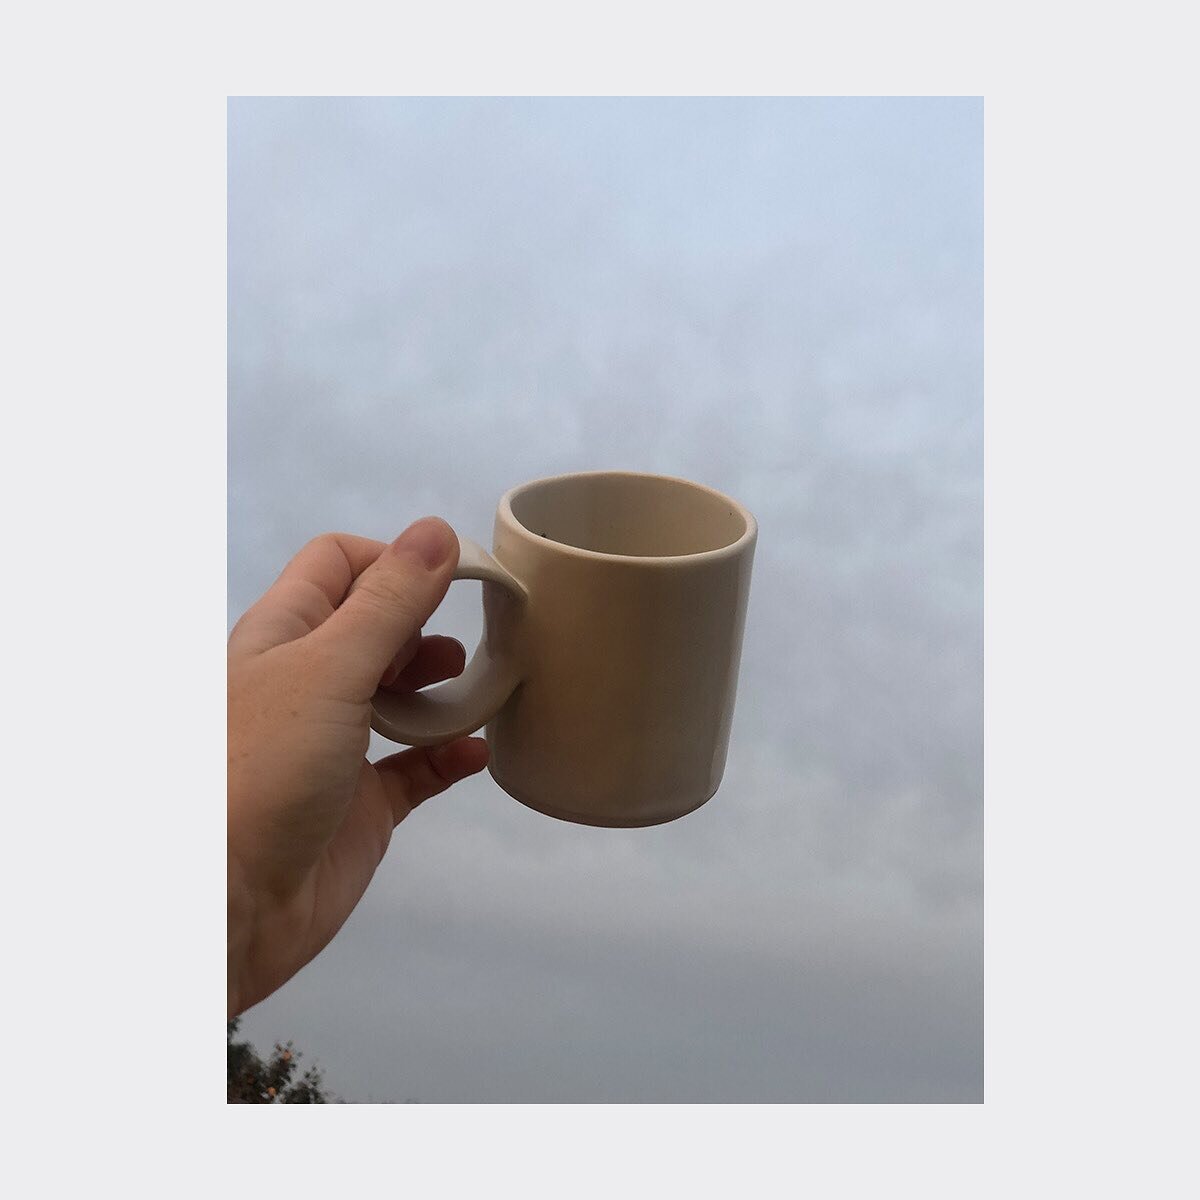 Long time to speak! In summary it&rsquo;s been a whirlwind to 2022 🌀 but! I&rsquo;ve just updated the shop with three coffee cups - snap one up while you can :-)

More things coming slow and steady real soon 🌀